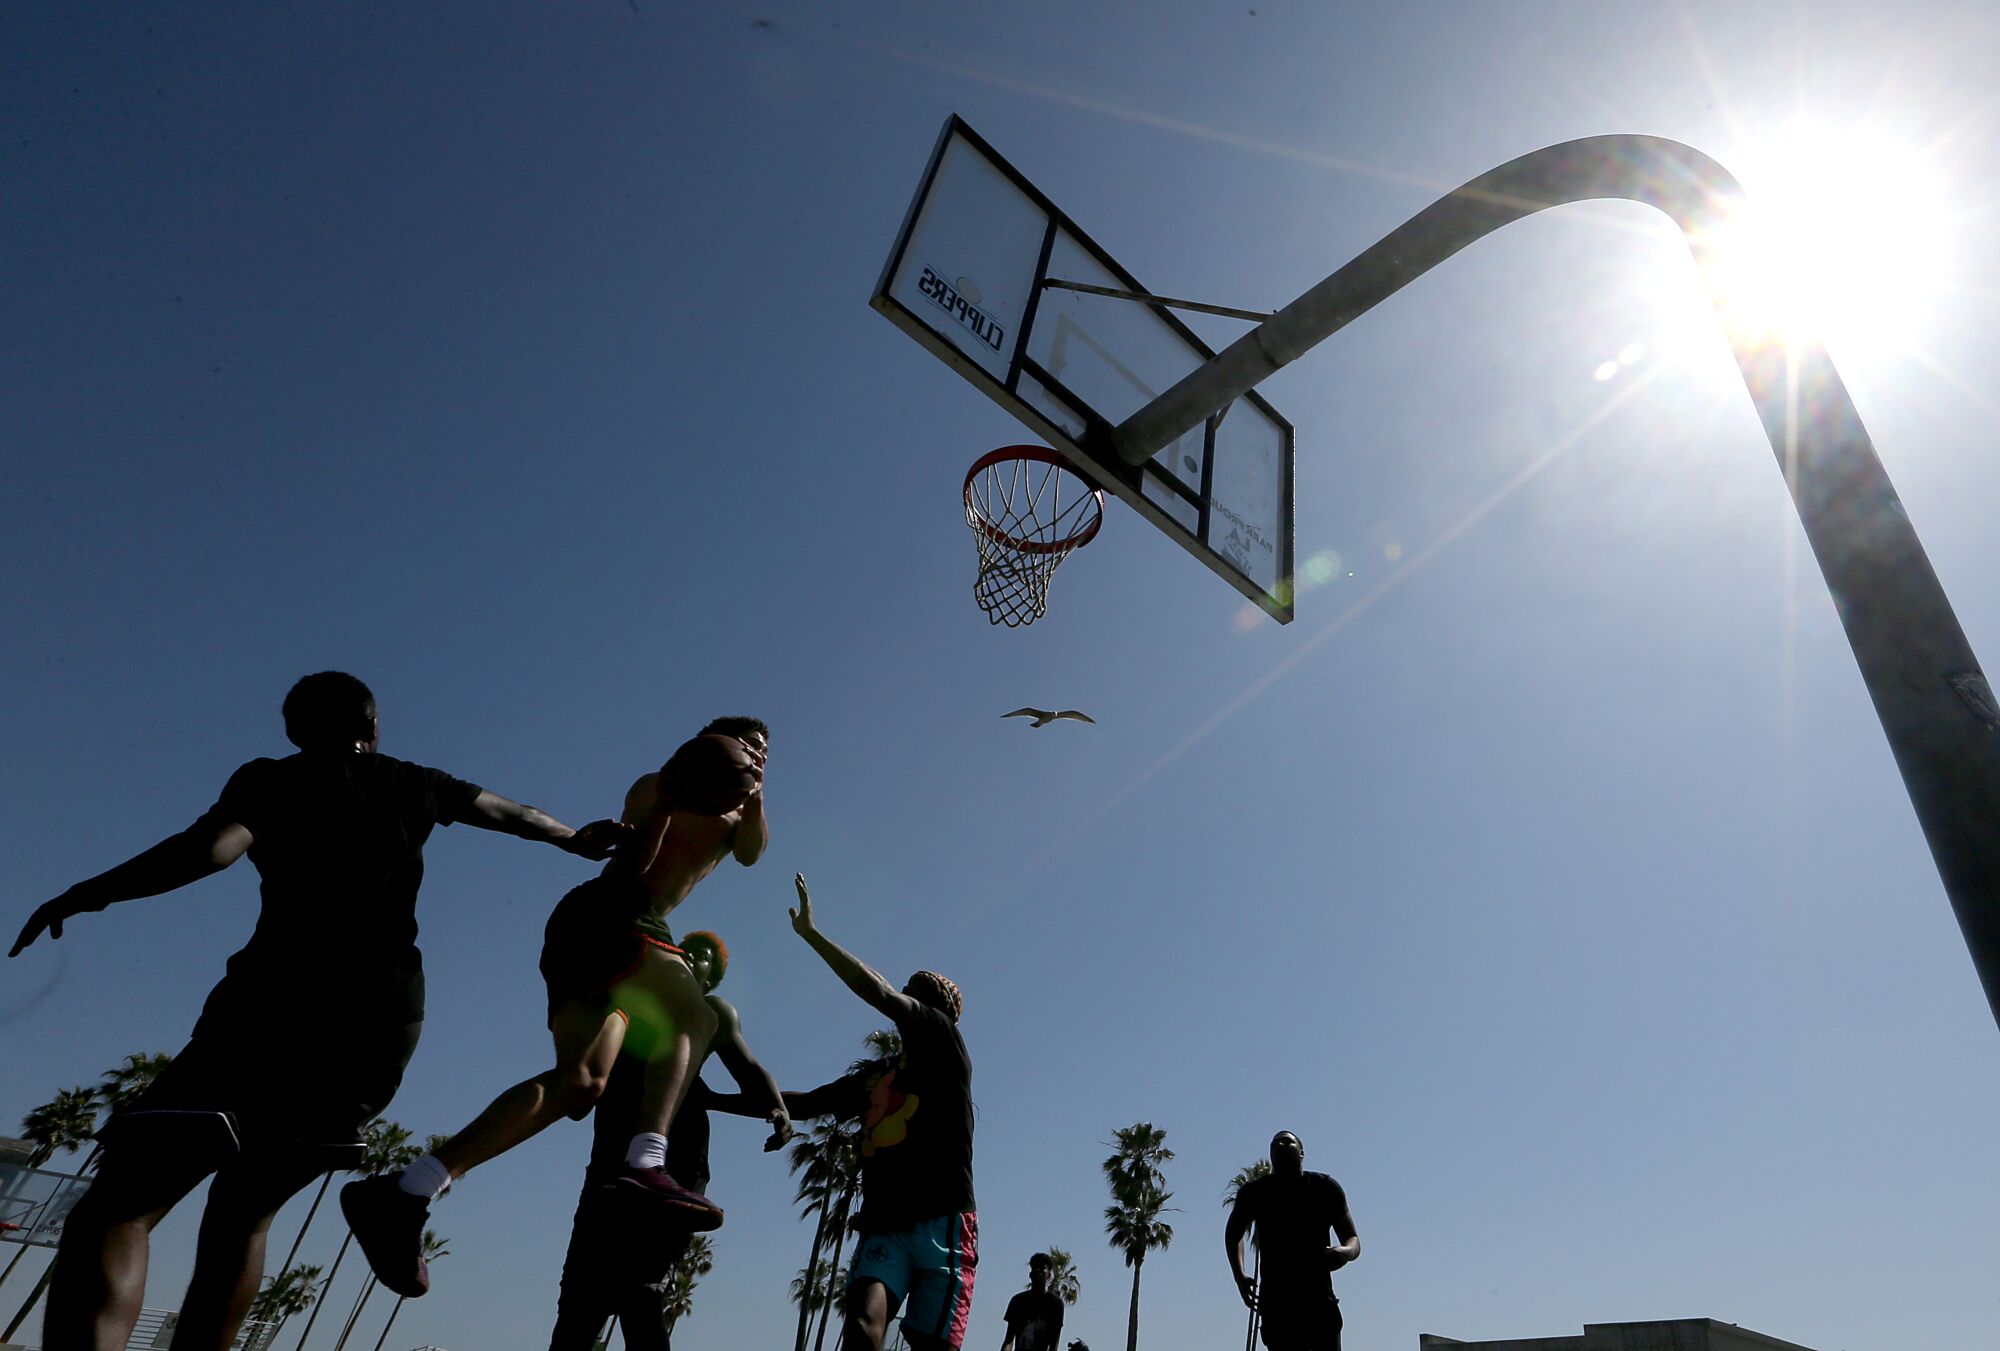 Basketball players compete in a pickup game Wednesday under a blazing sun at Venice Beach.